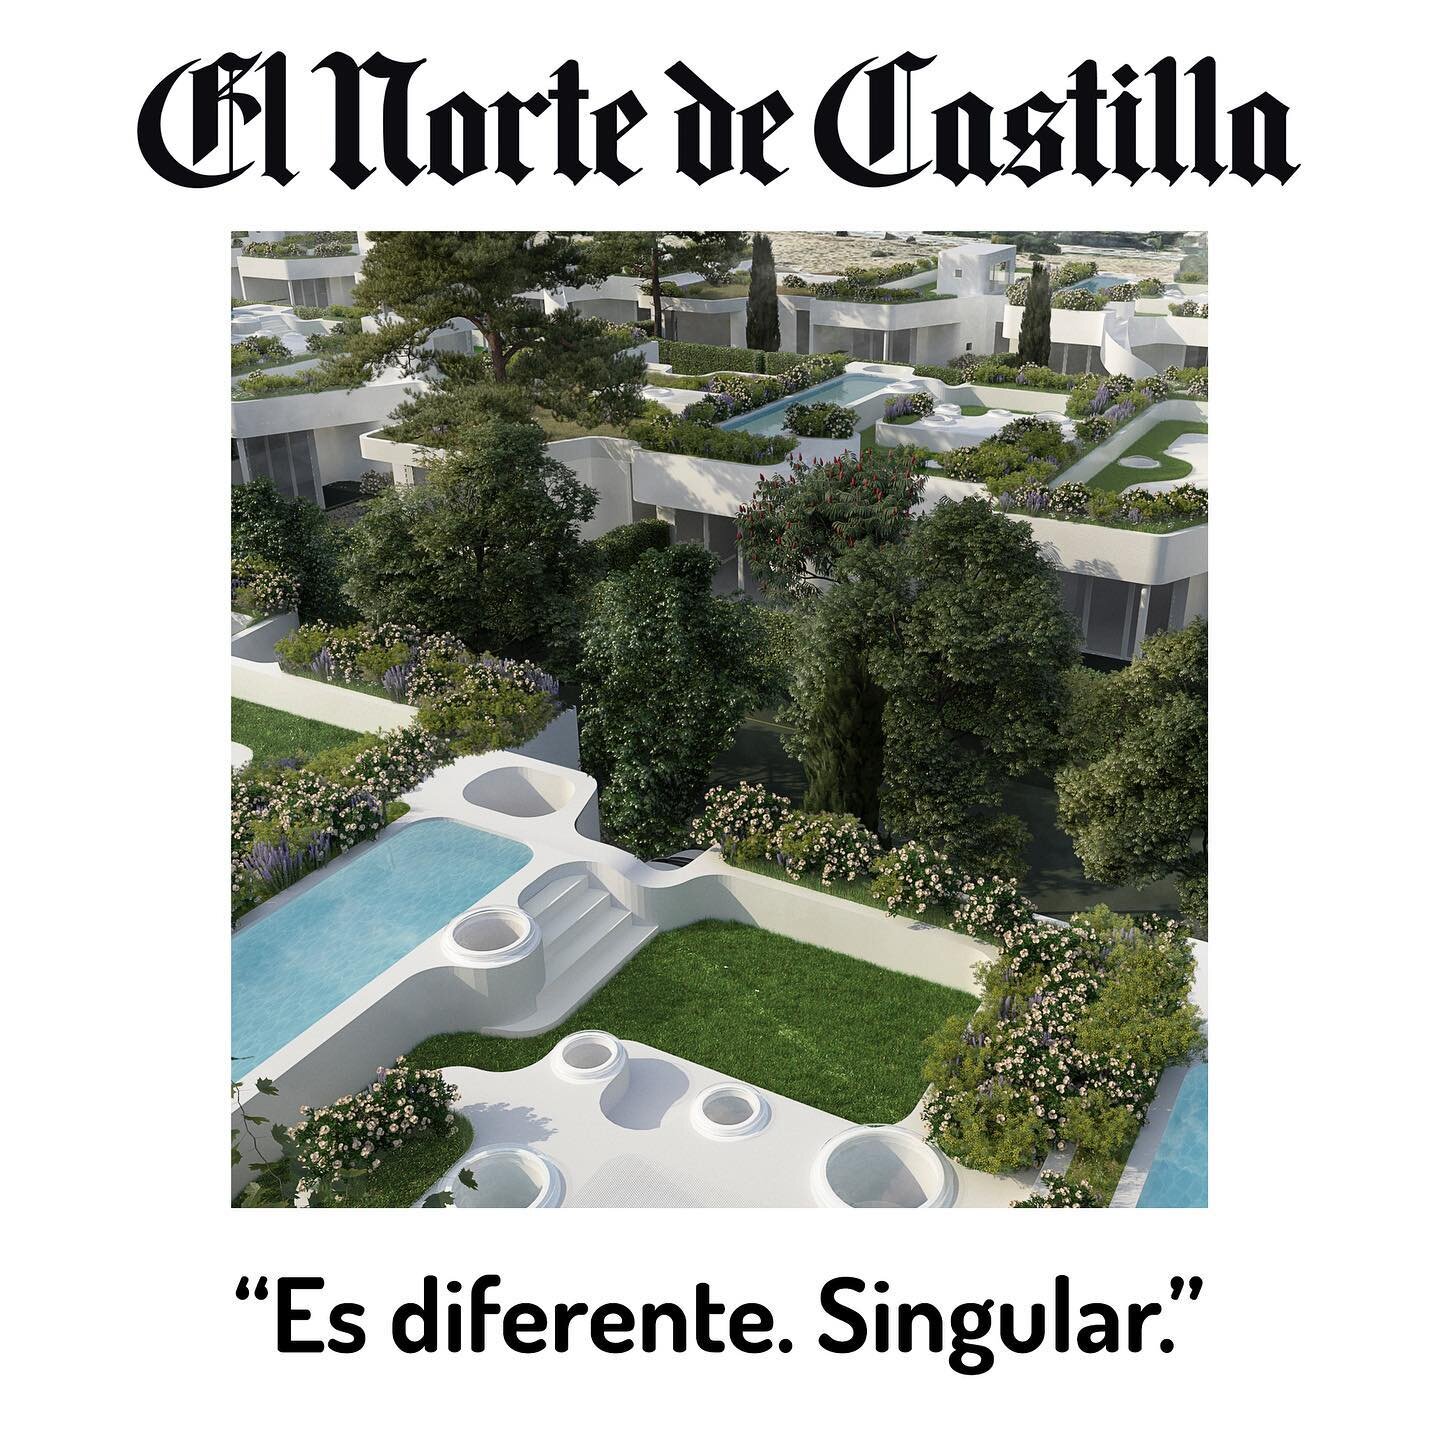 &ldquo;It&rsquo;s different. Singular.&rdquo; This is how J. Asua, journalist at El Norte de Castilla, the main local newspaper in Valladolid, decided to start his recent article about our proposal for the housing condominium we have designed in the 